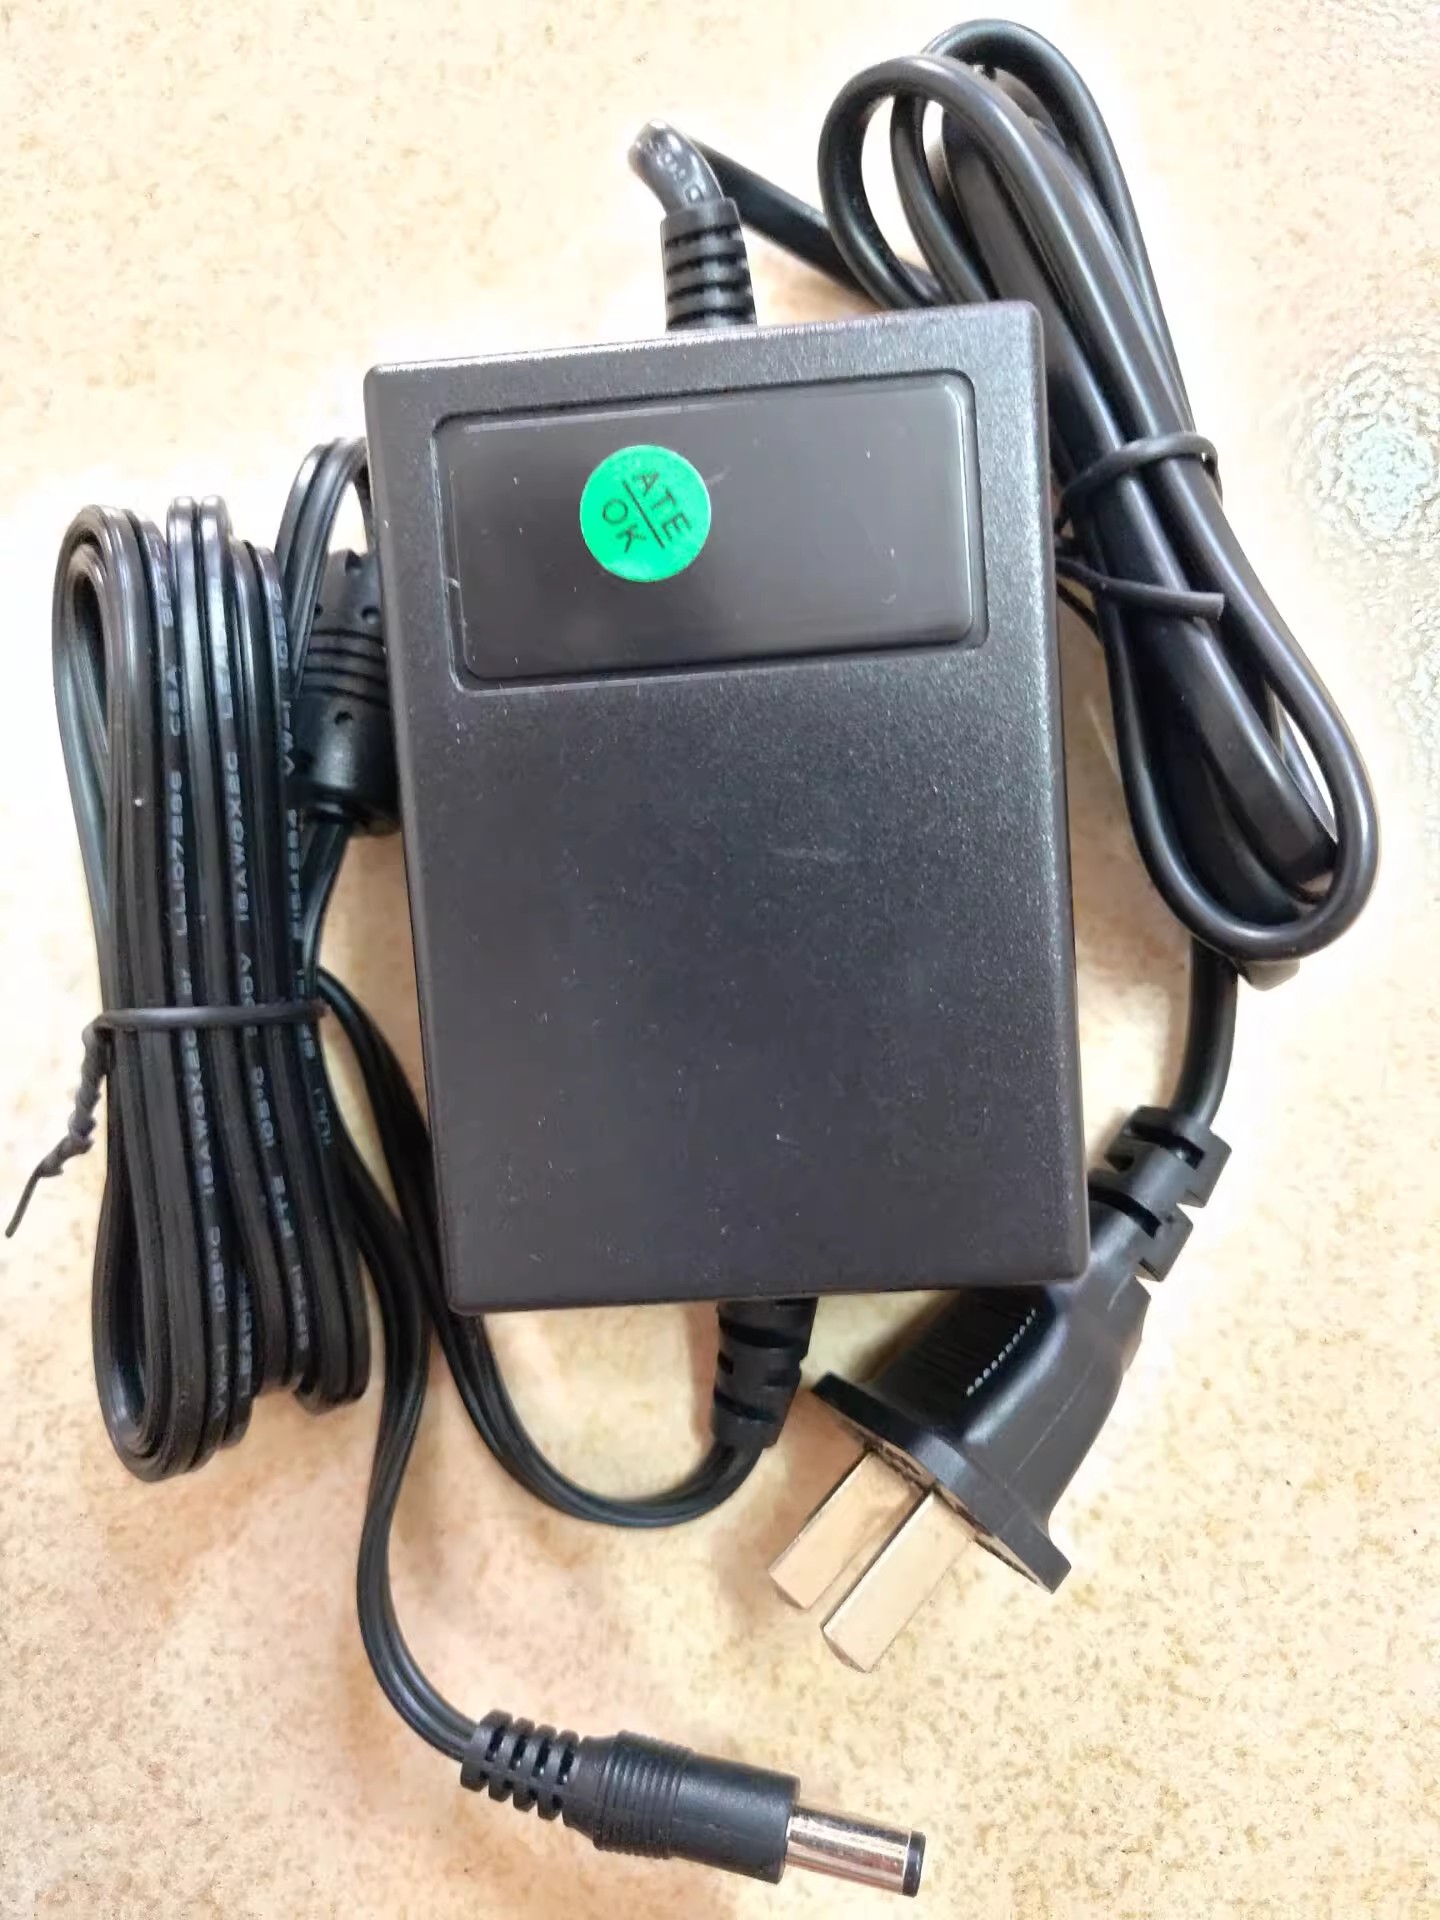 *Brand NEW* 12V 1.5A（1500MA）AC DC ADAPTHE KW200-7 POWER Supply - Click Image to Close